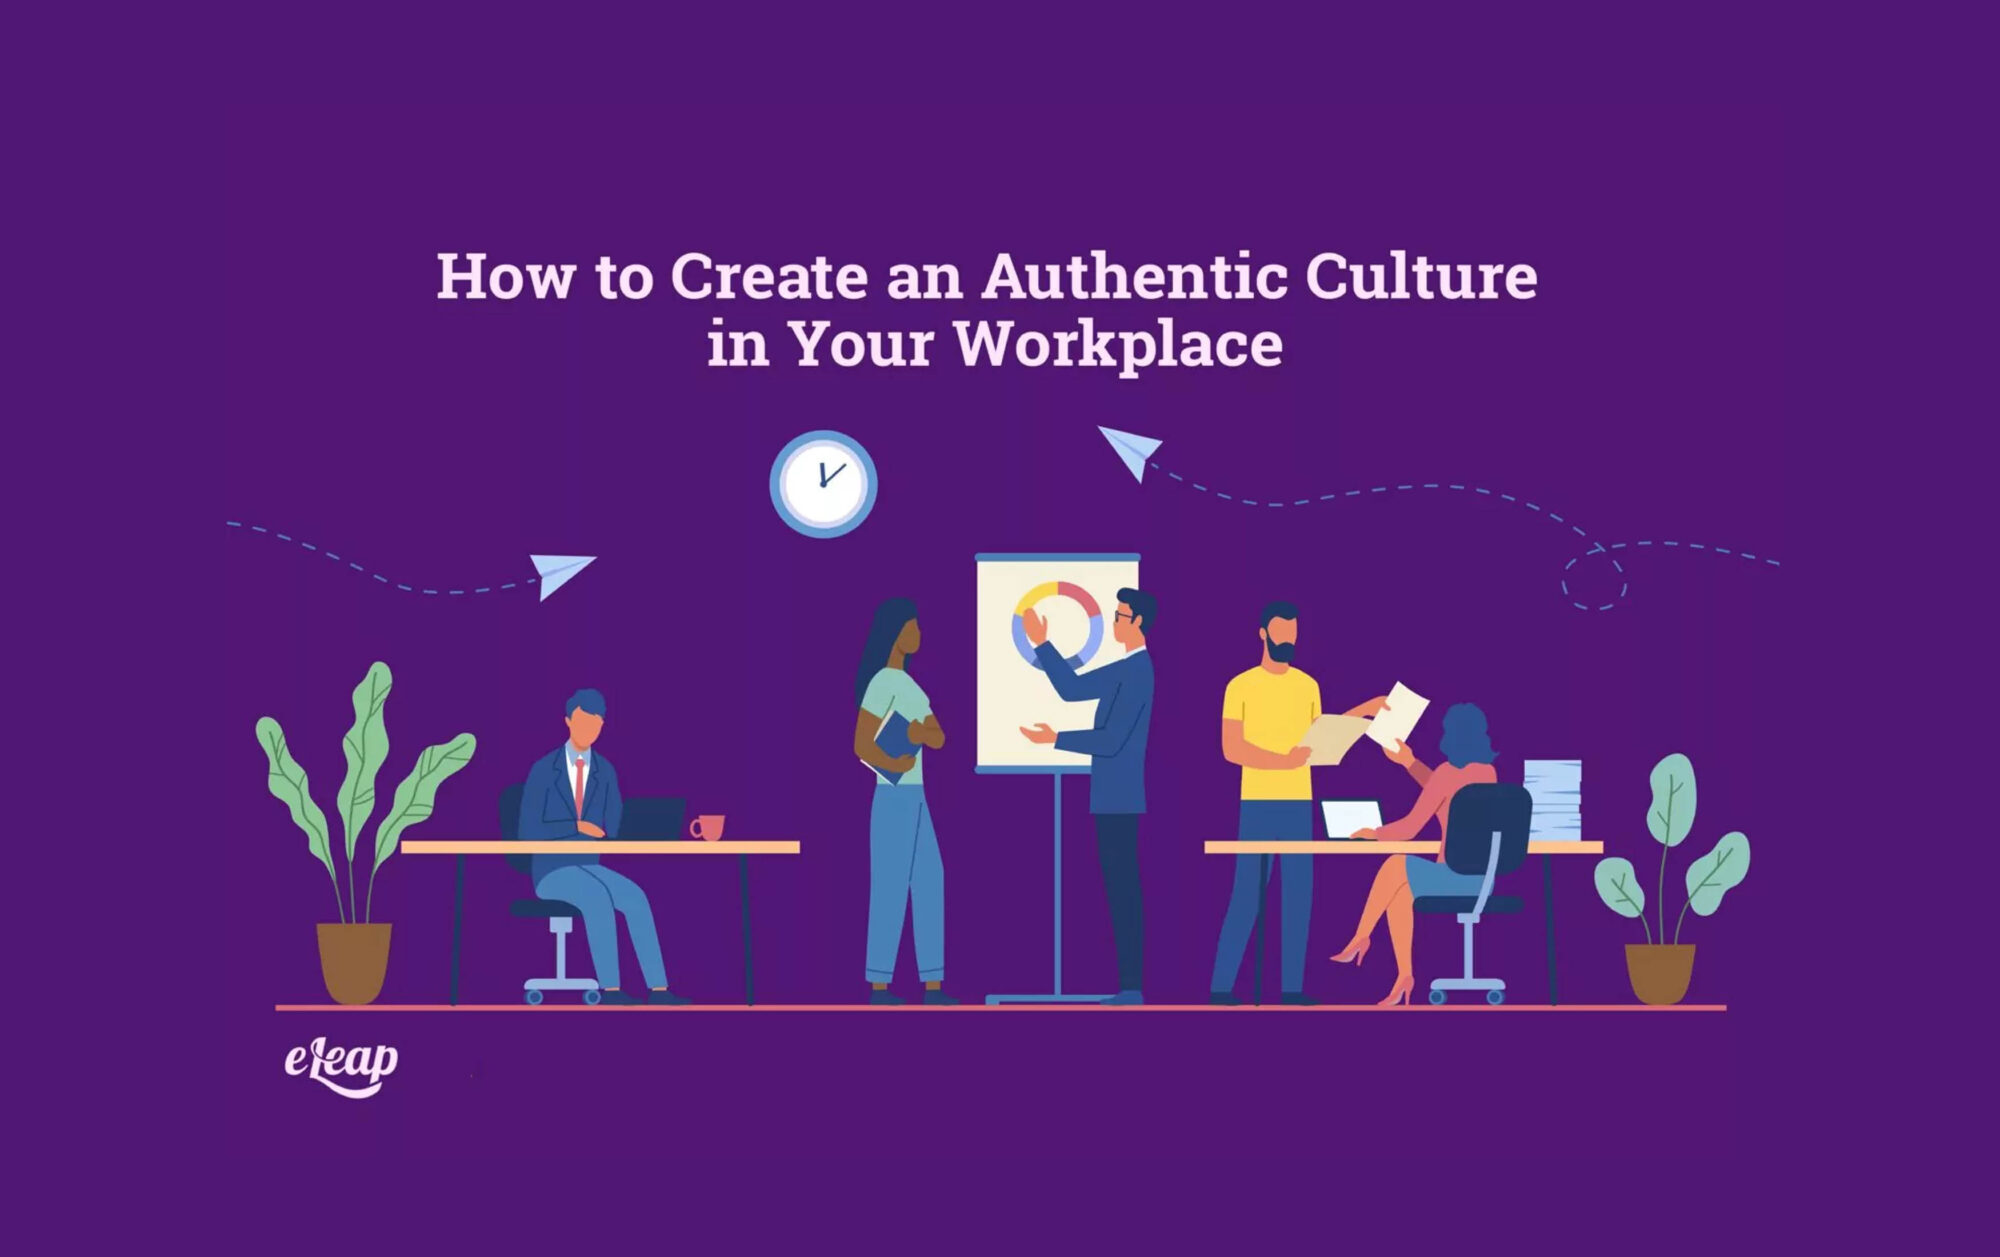 How to Create an Authentic Culture in Your Workplace